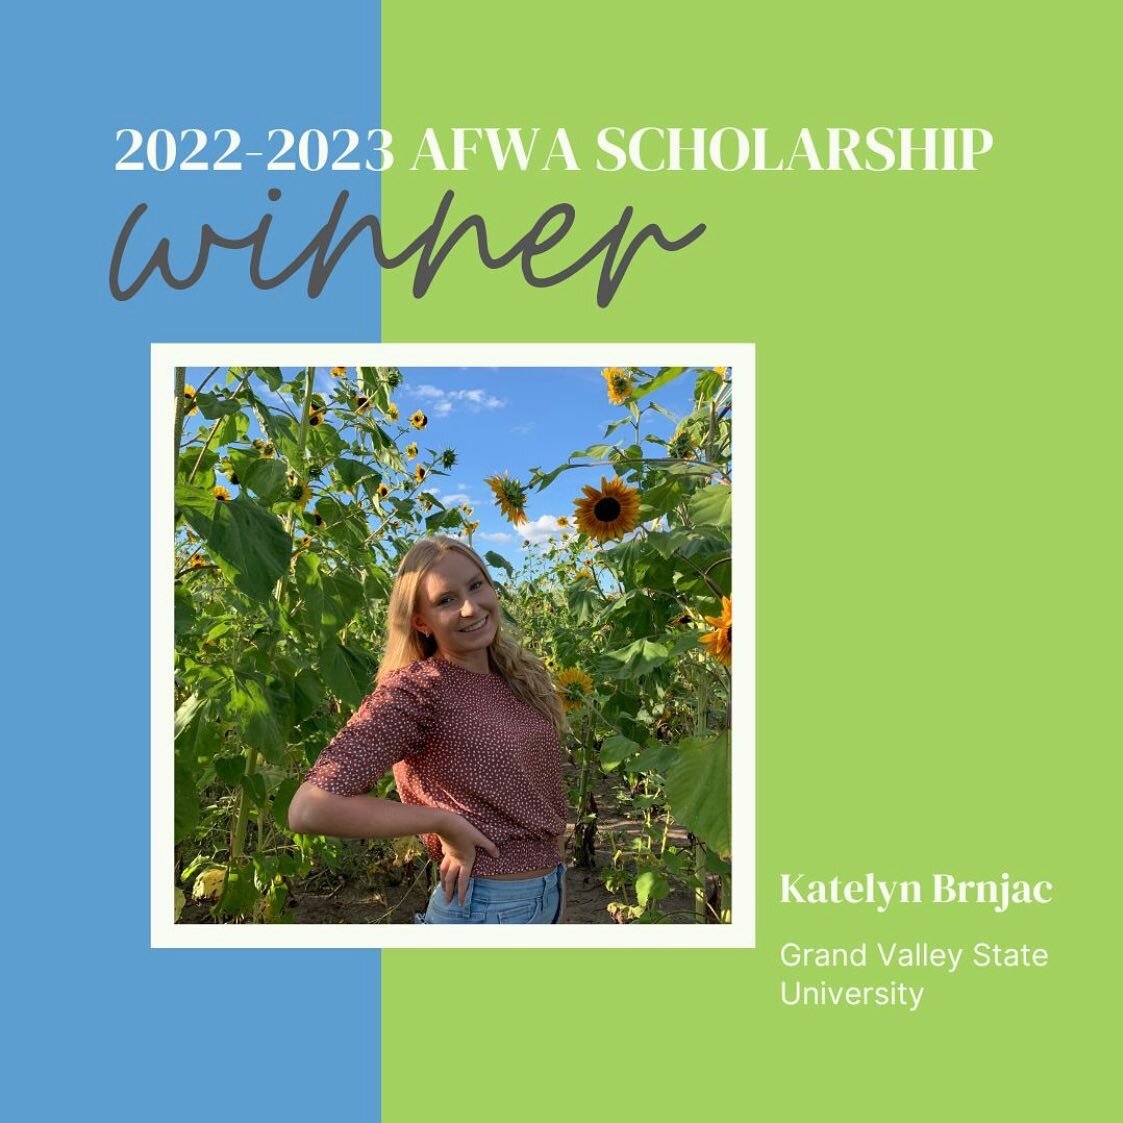 We are excited to announce our annual AFWA Scholarship recipients for 2022-2023 are @olivia.ploucha and @katelyn_brnjac - Congratulations, ladies!
 
Olivia Ploucha will be a senior this fall at Grand Valley State University. She is majoring in accoun